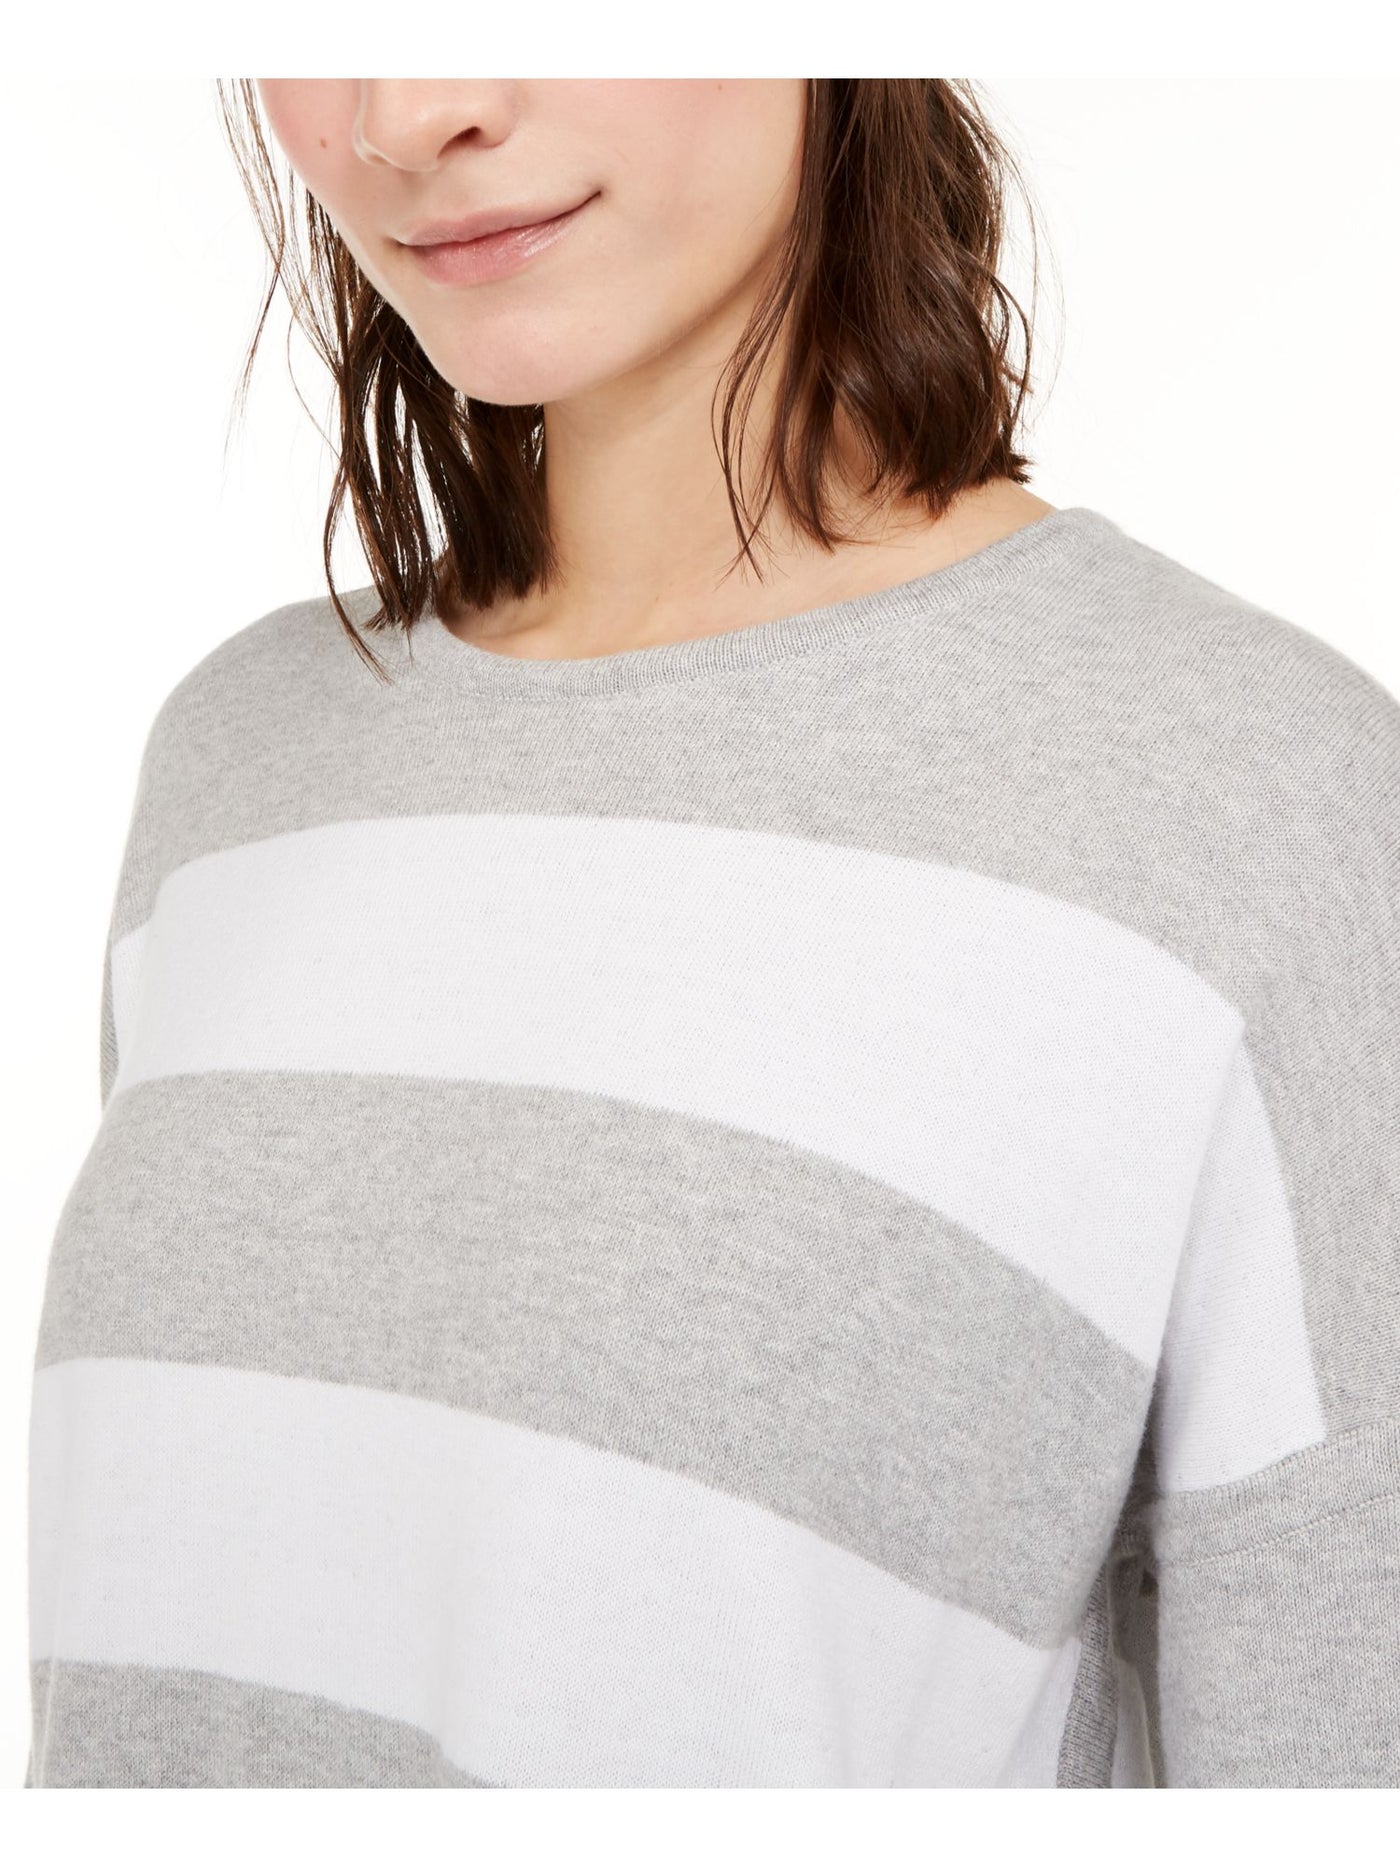 EILEEN FISHER Womens Gray Striped Long Sleeve Sweater Petites Size: PP